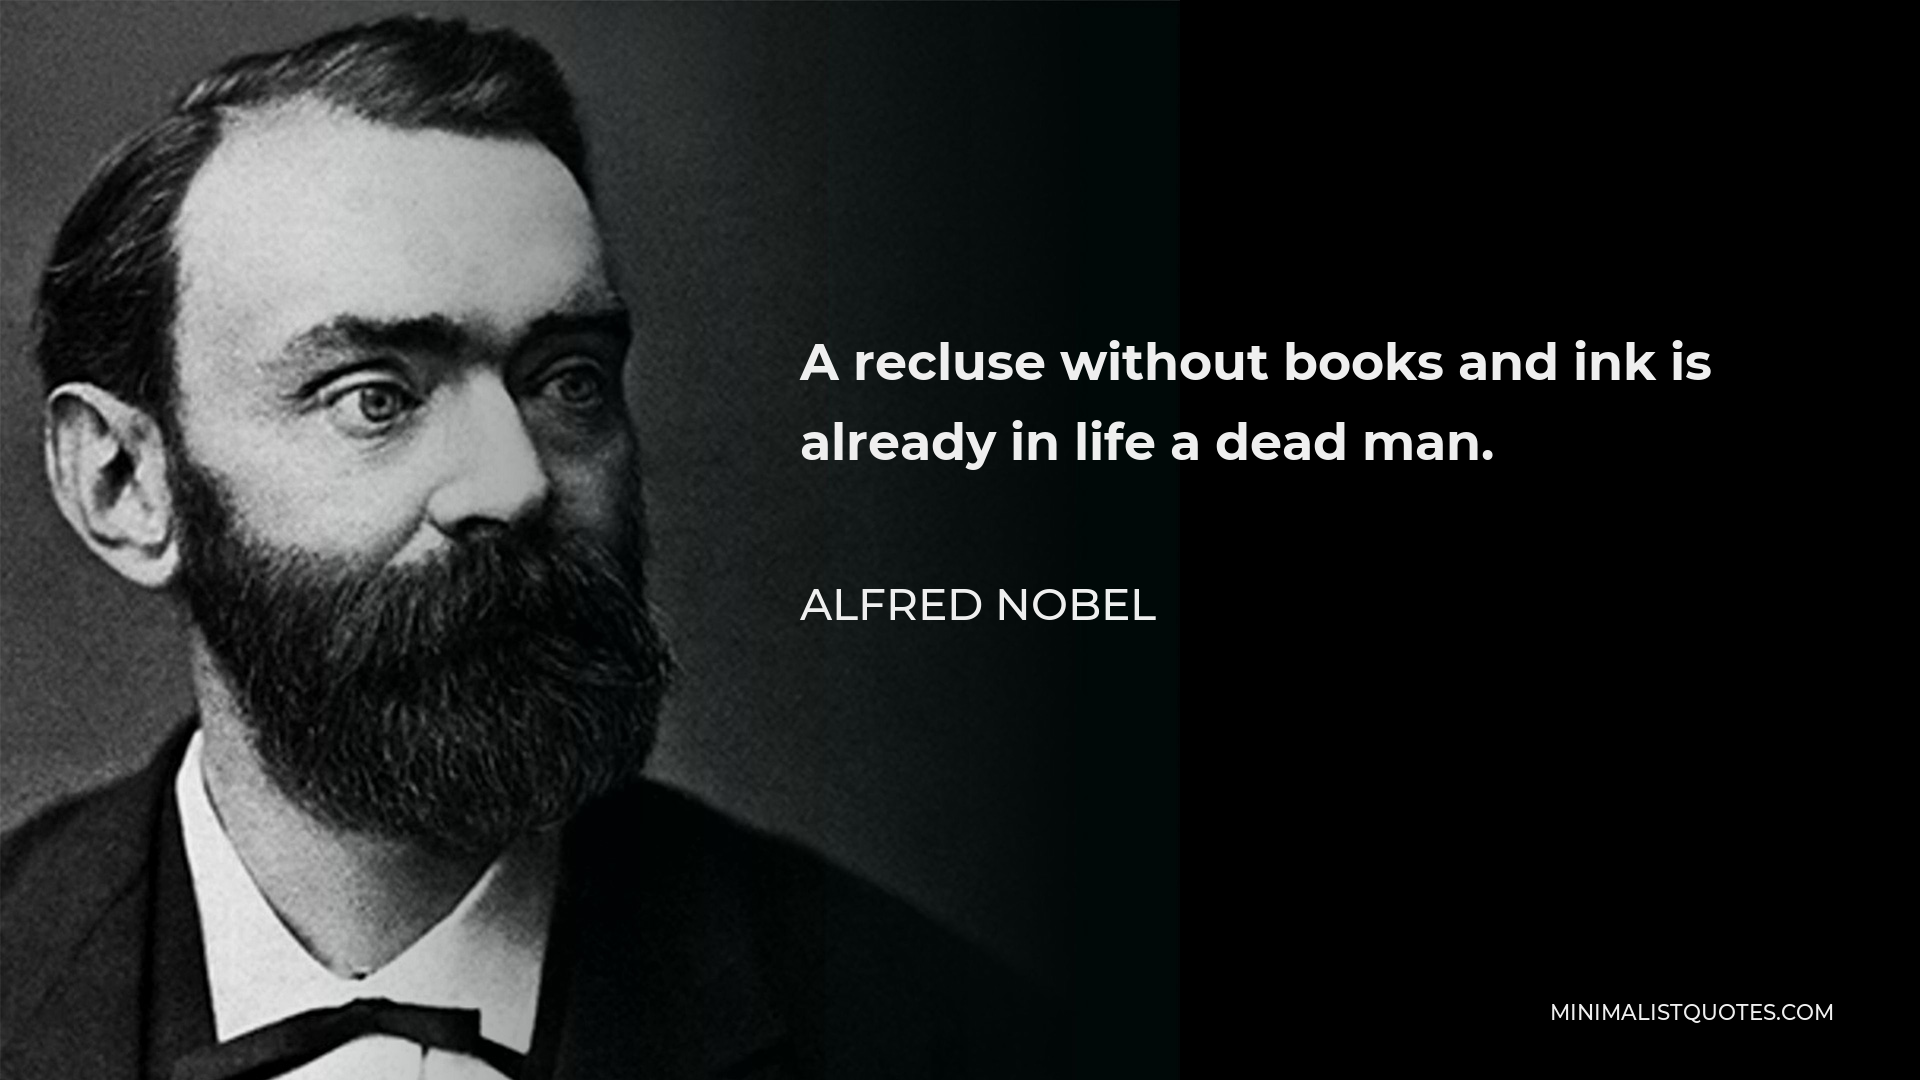 Alfred Nobel Quote - A recluse without books and ink is already in life a dead man.